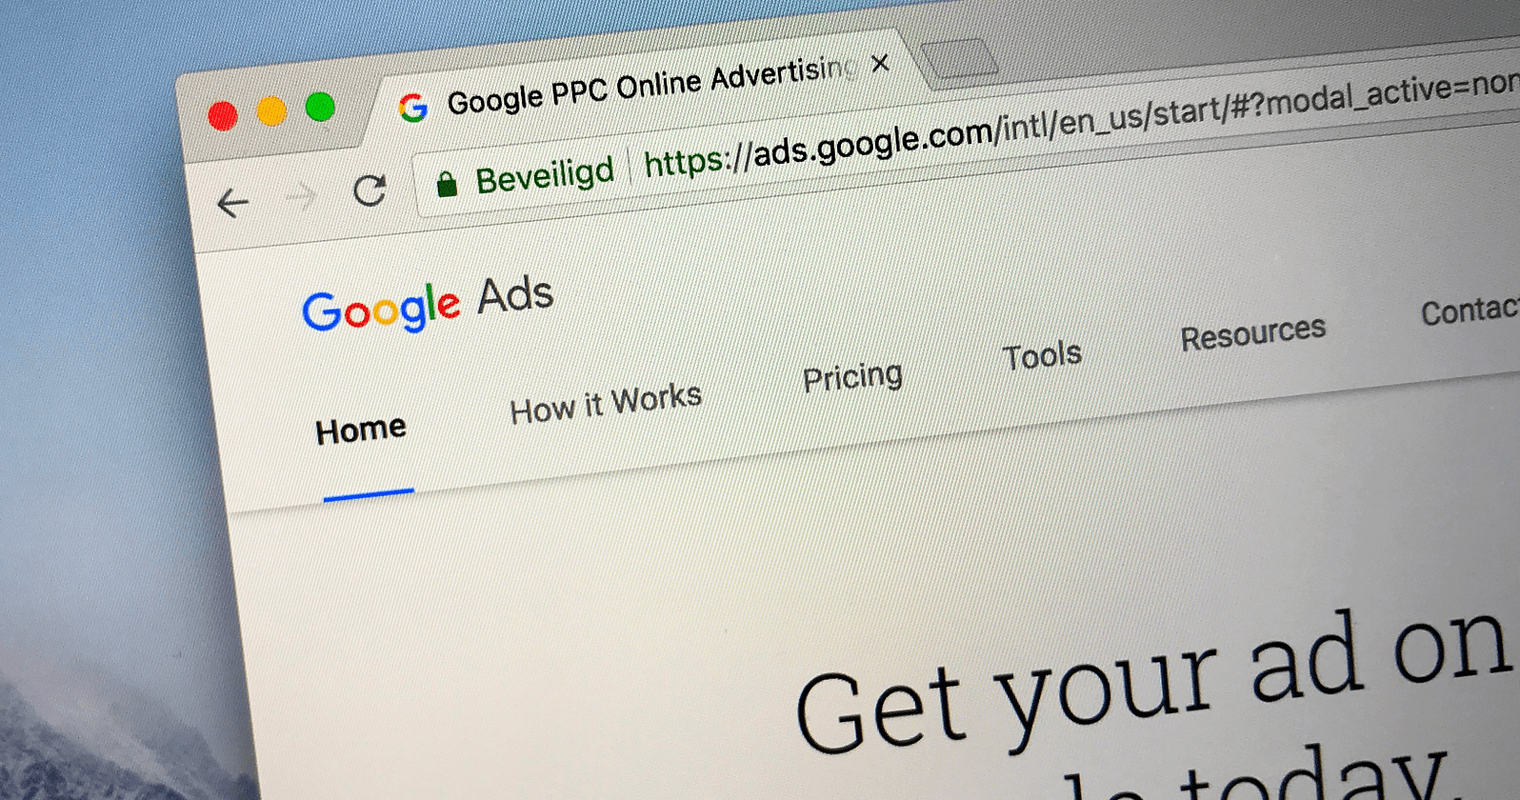 Google Ads Switches to Smart Bidding for Search Partner Sites